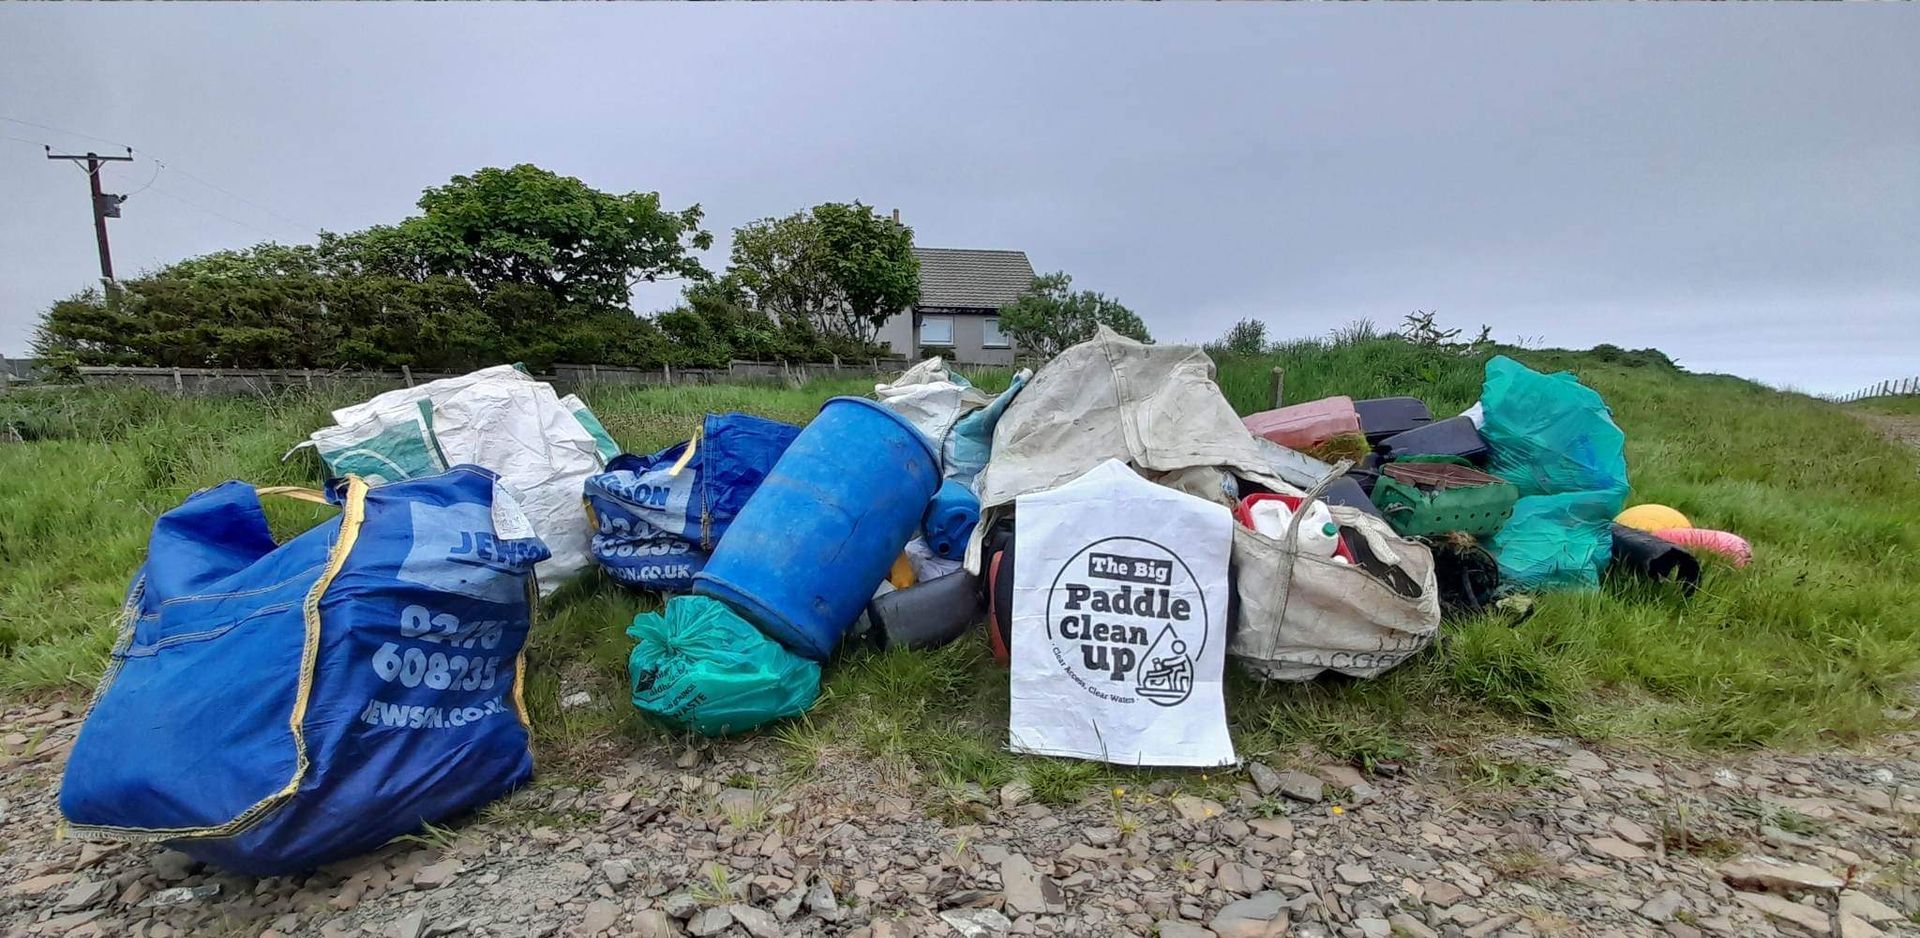 Rubbish collected in the Big Paddle Clean Up